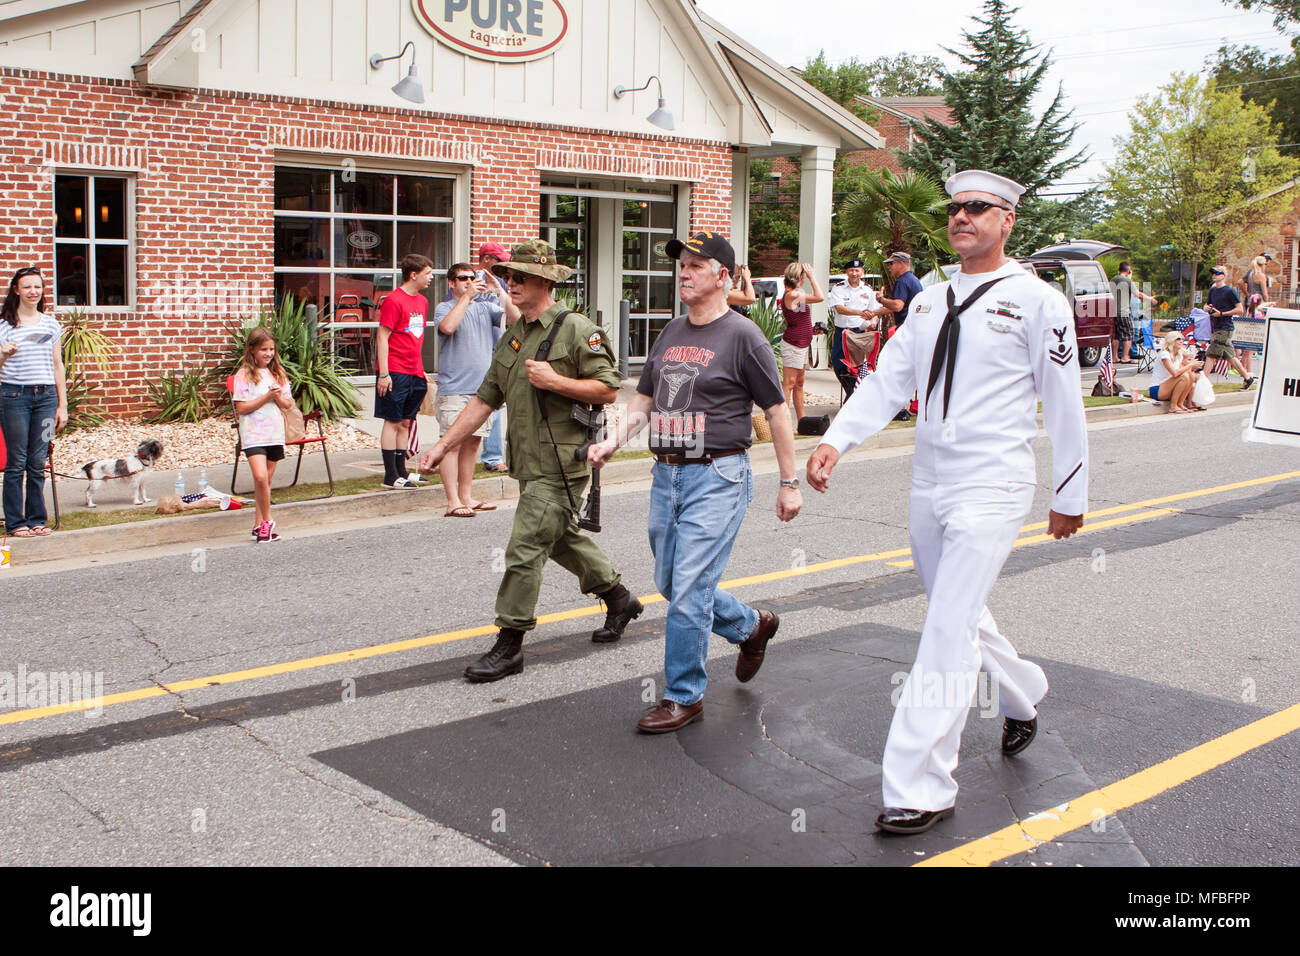 Three combat veterans representing the Army, Navy and Marines walk in the annual Old Soldiers Day Parade on August 1, 2015 in Alpharetta, GA. Stock Photo